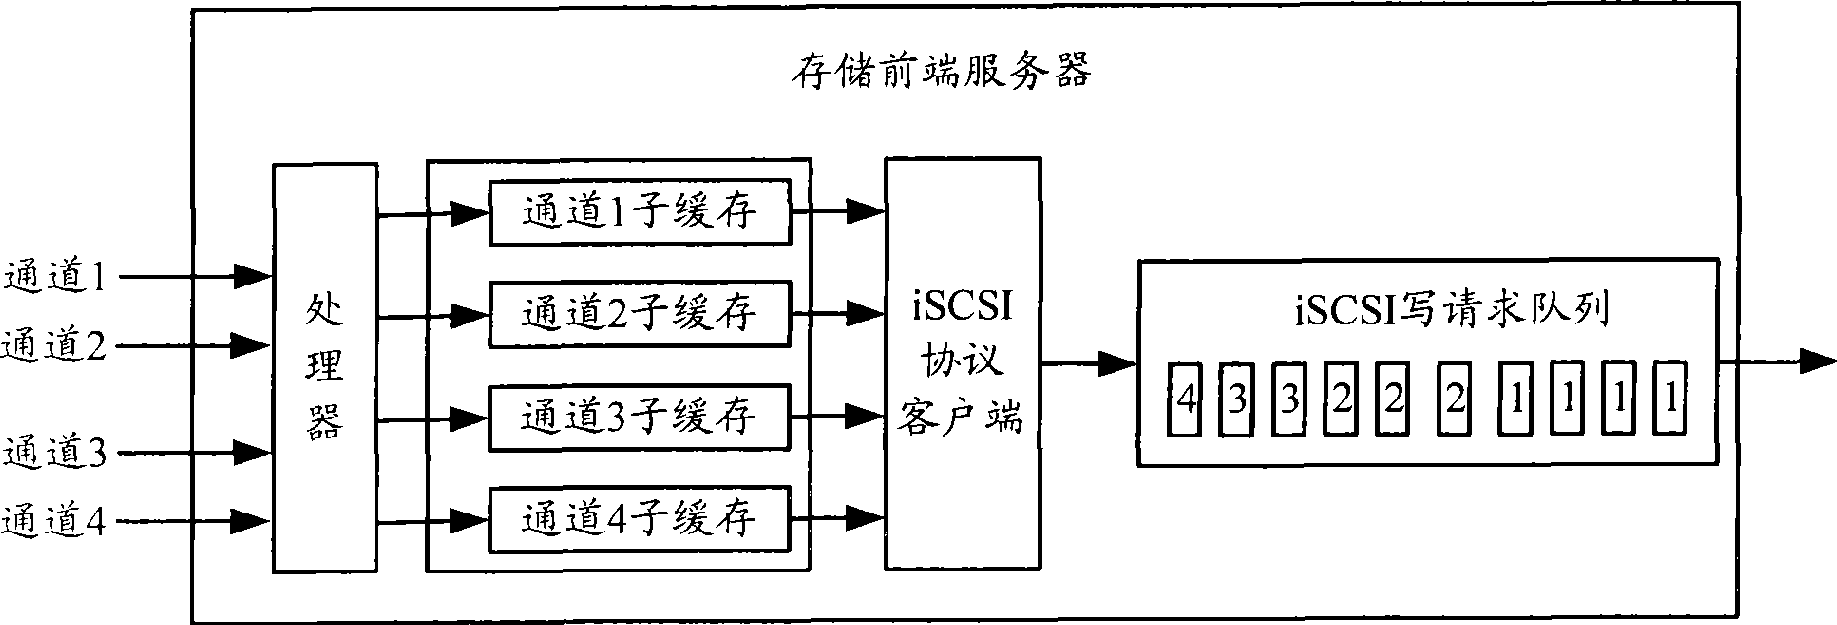 Data transmission scheduling method, system and device for IP SAN storage